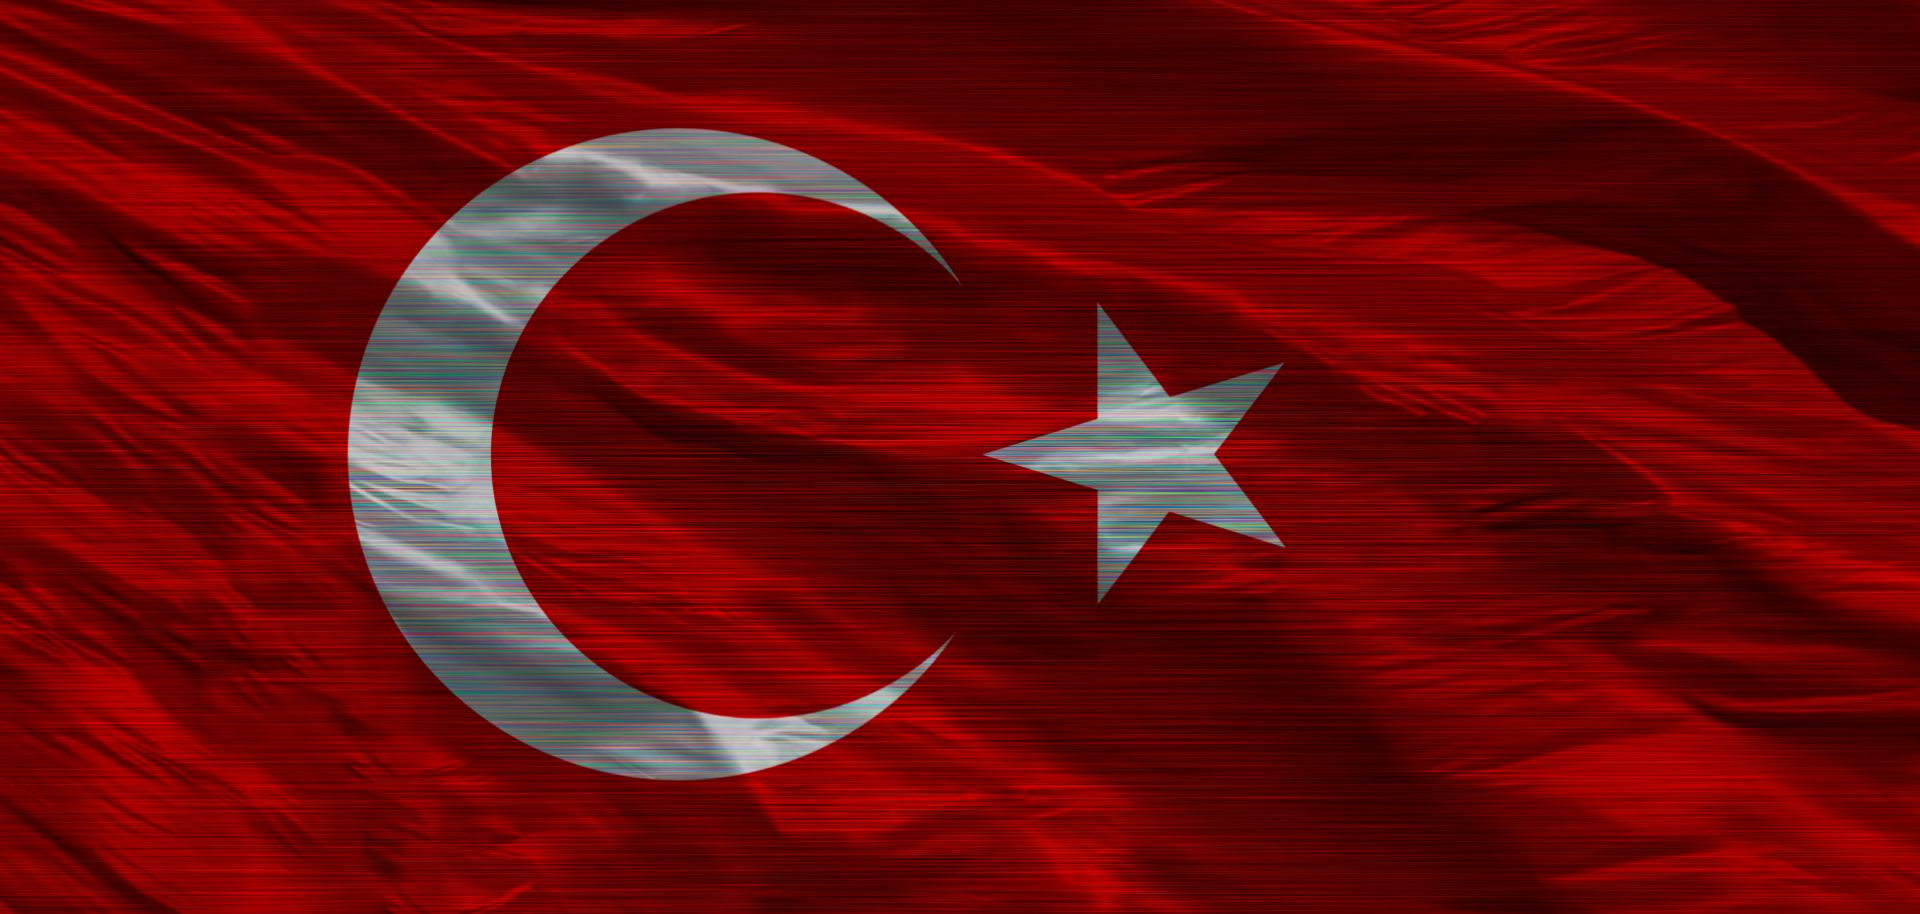 An image of the Turkish flag. 